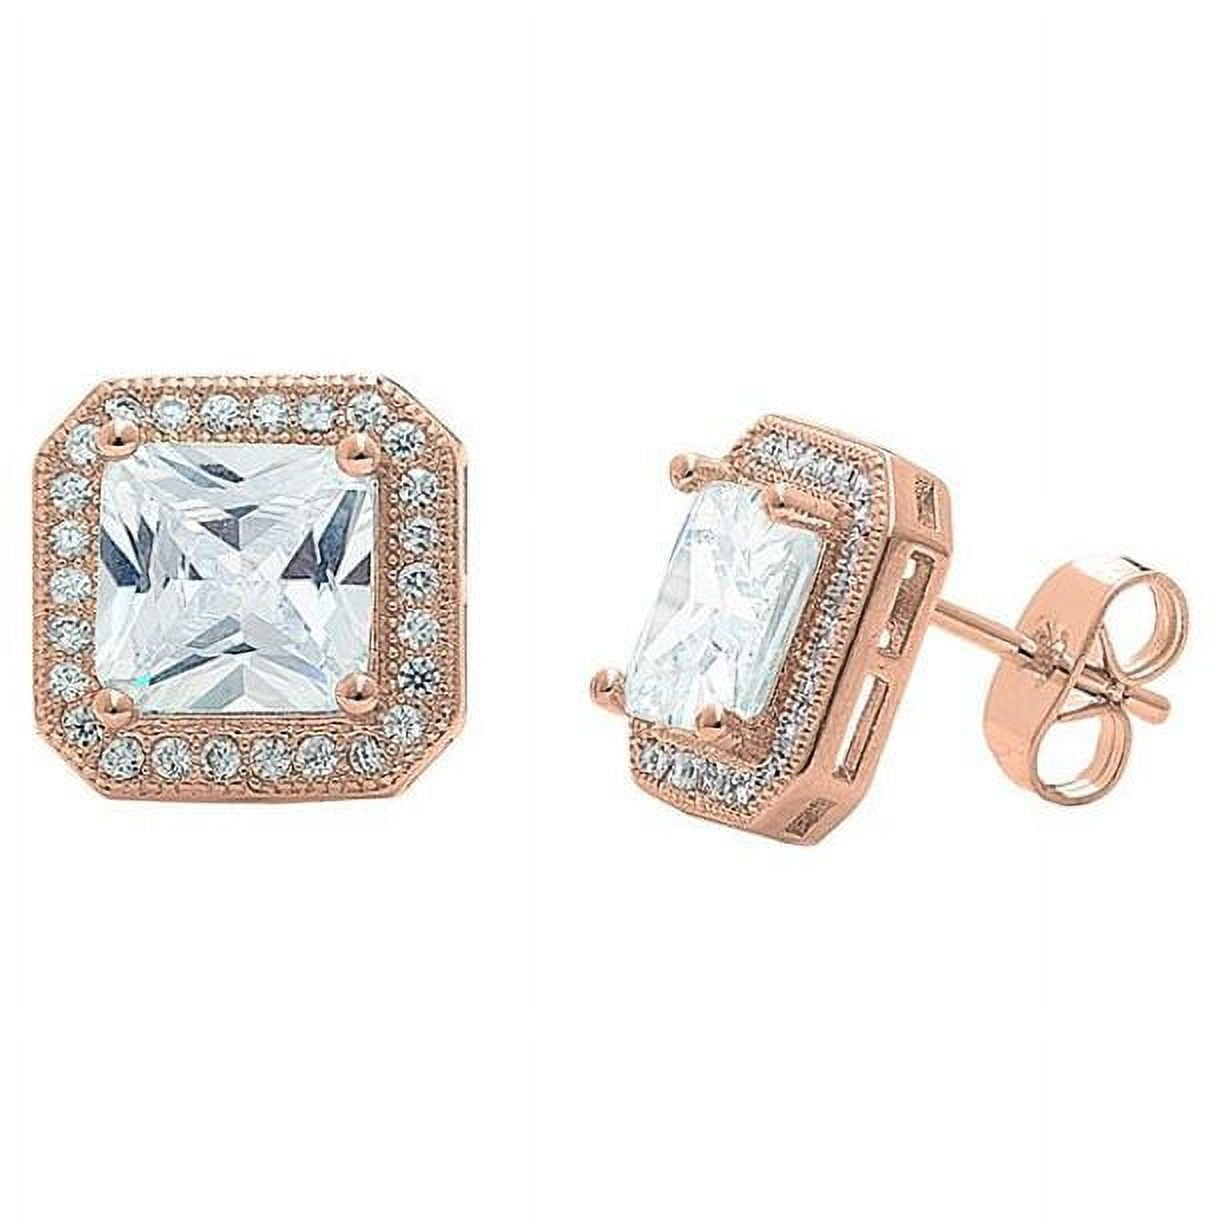 Cate & Chloe Norah 18k Rose Gold Plated CZ Stud Earrings | Women's Crystal Earrings, Jewelry Gift for Her - image 1 of 7